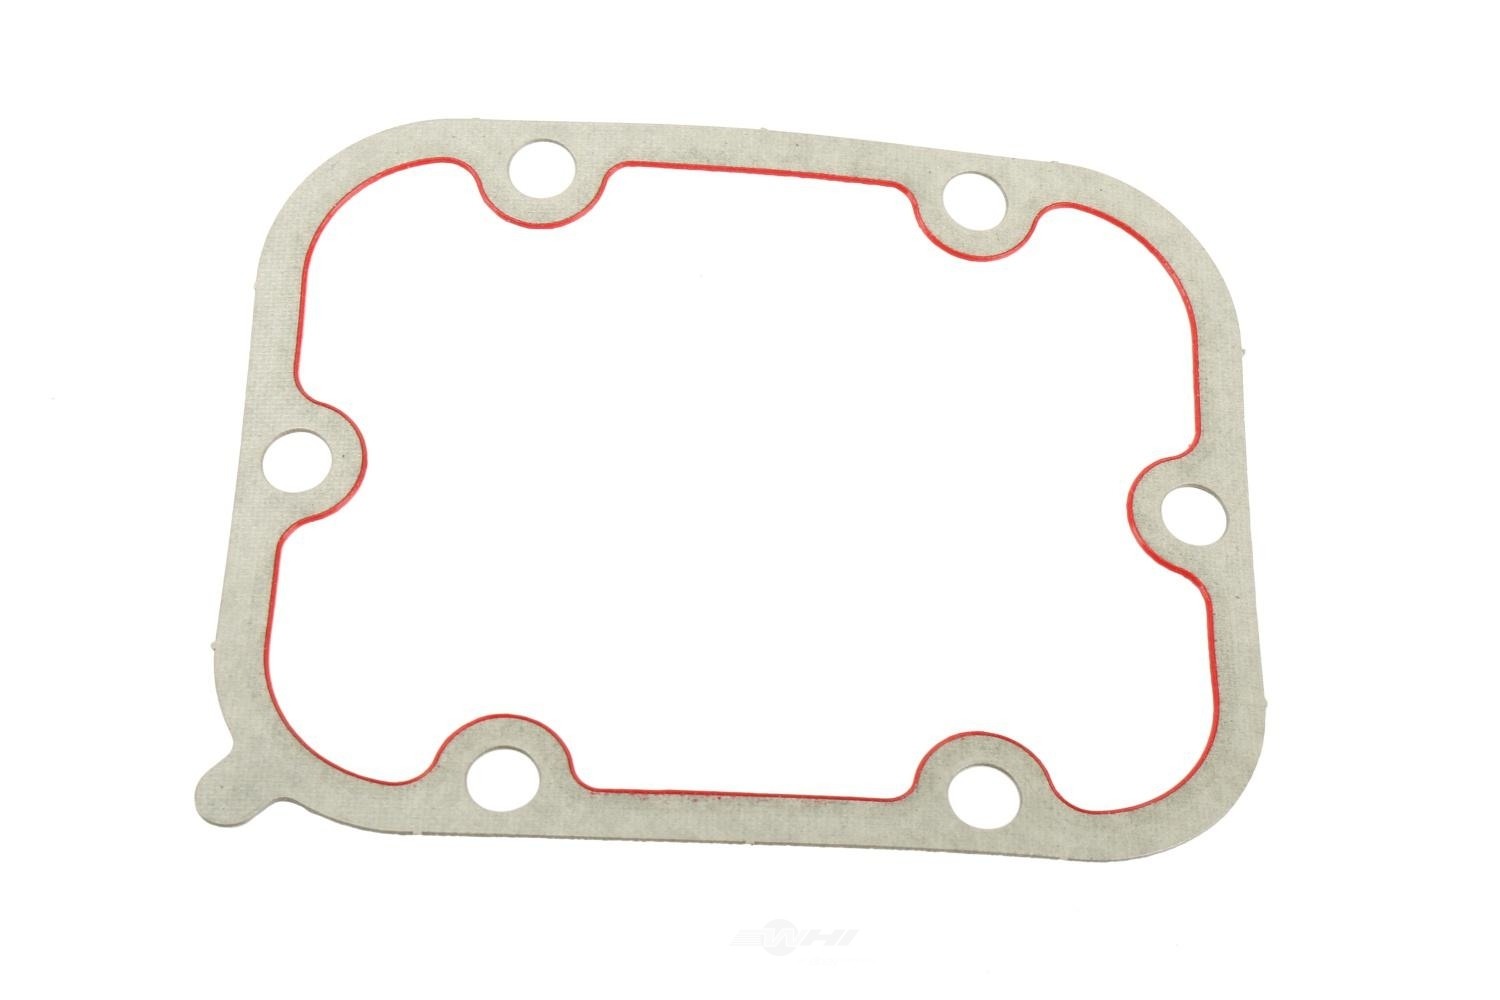 GM GENUINE PARTS - Automatic Transmission Power Take Off (PTO) Gasket - GMP 29531325